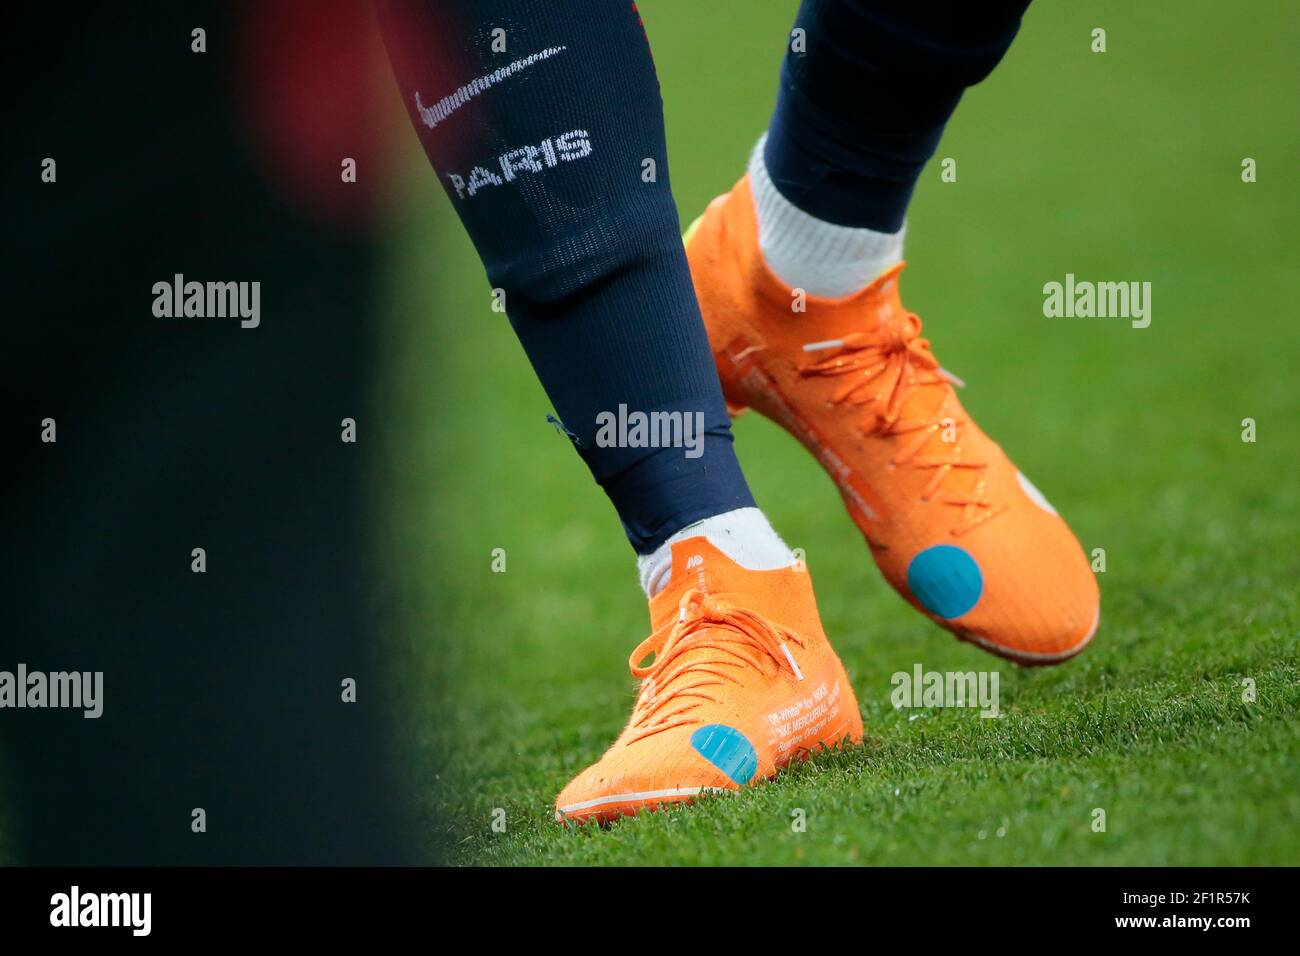 Shoes of Kylian Mbappe (PSG), Off-White ™ for NIKE 'Nike Mercurial Vapore'  Beaverton, Oregon USA c. 2018 'KNIT', during the French championship L1  football match between Paris Saint-Germain (PSG) and Monaco, on